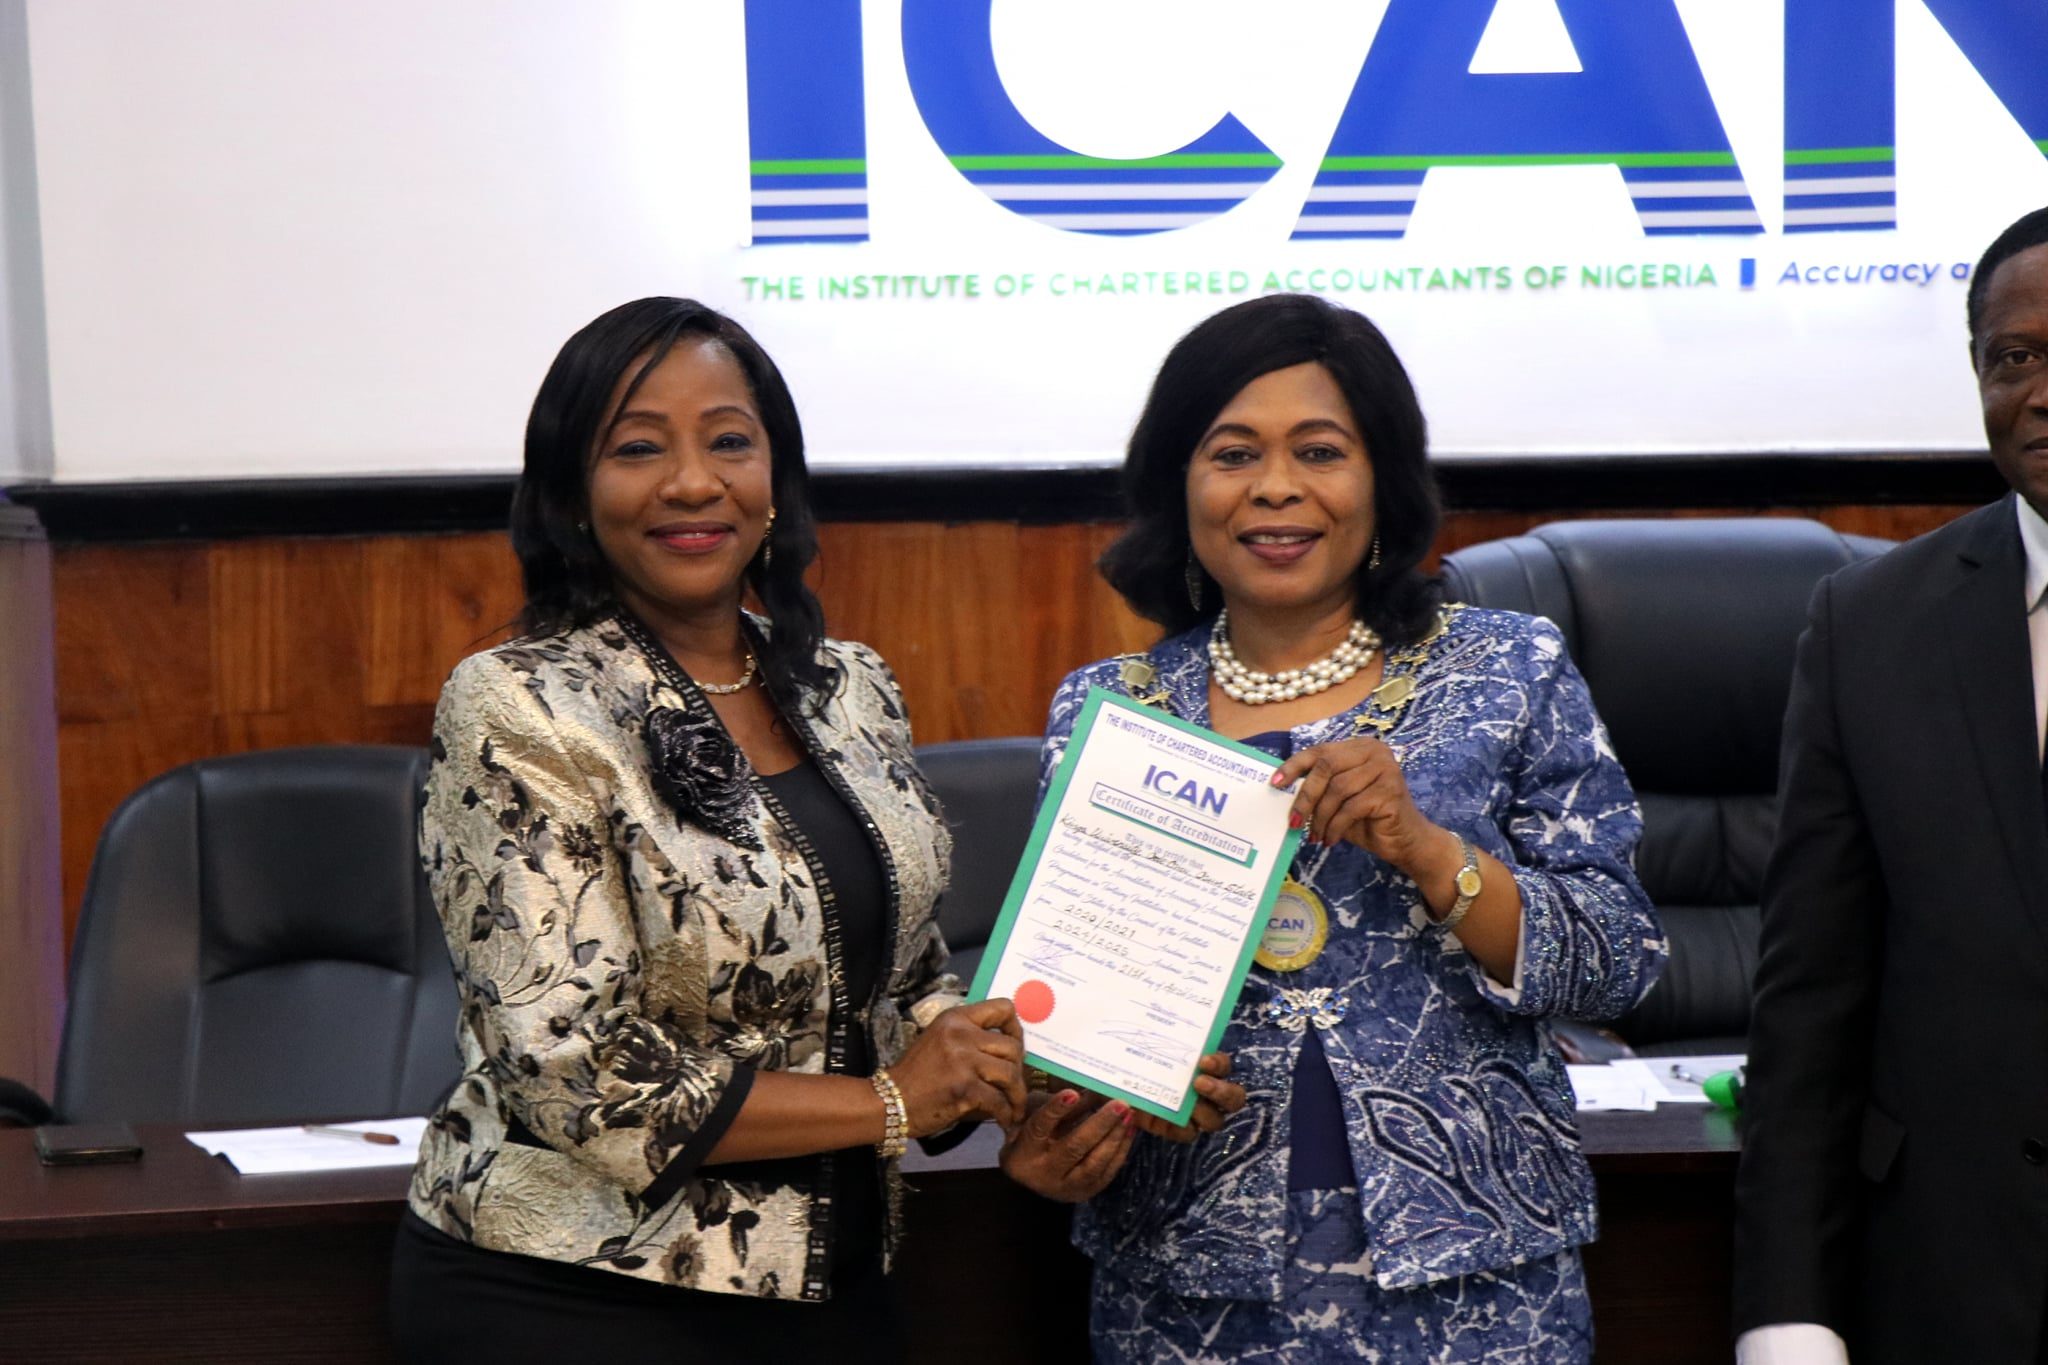 KINGS UNIVERSITY, NIGERIA RECEIVES ICAN ACCREDITATION